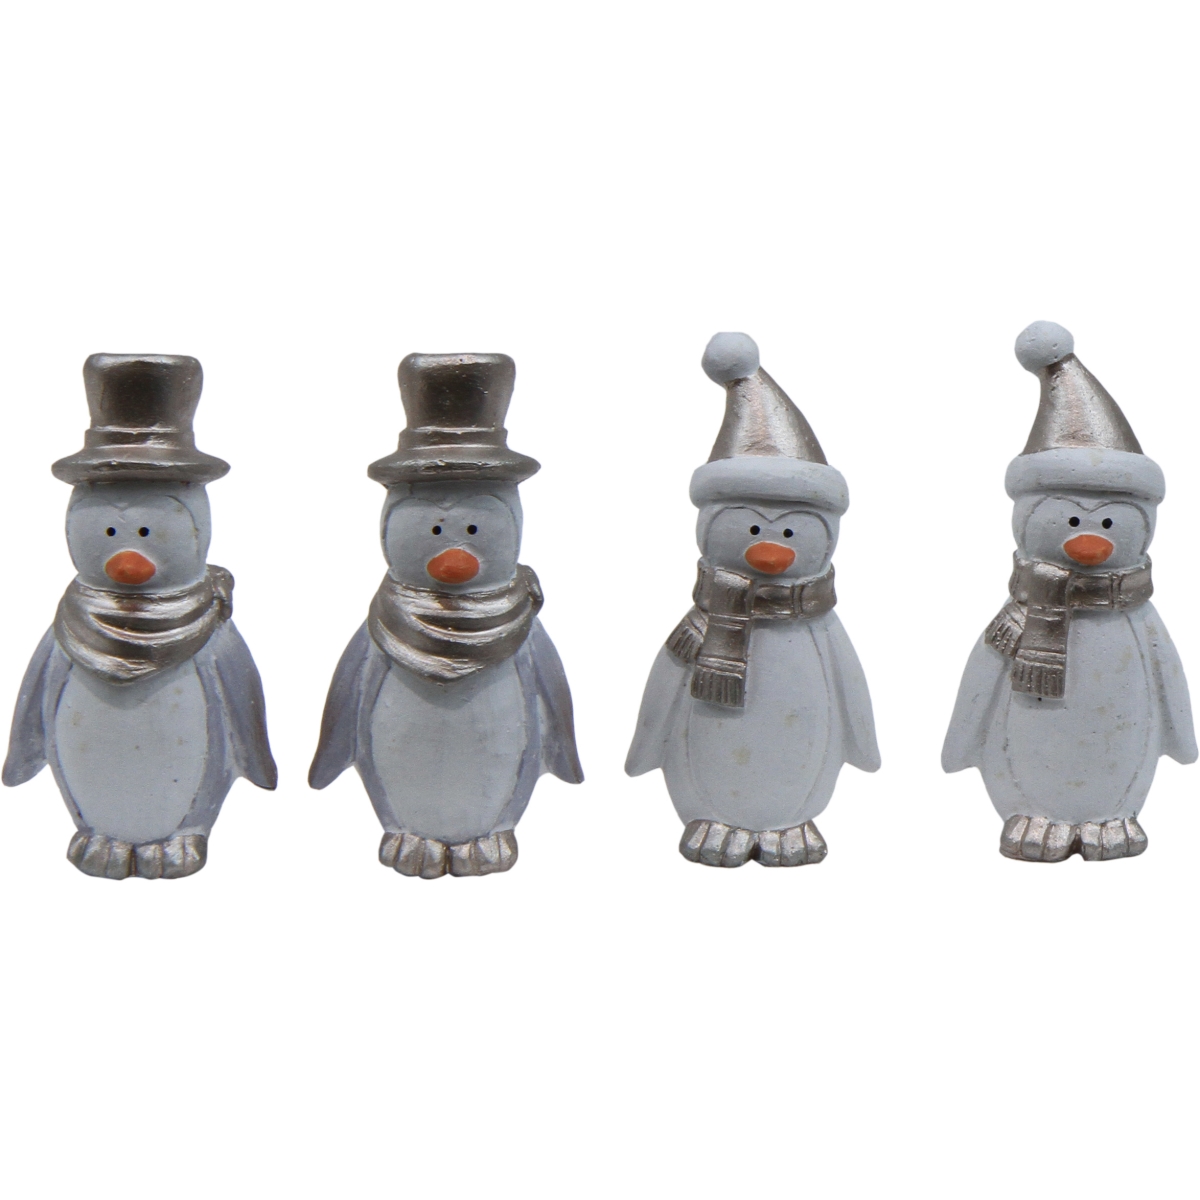 Picture of Forpost FP-PMDF-233 Papier Mache Penguins in Hats Figurine - Set of 4